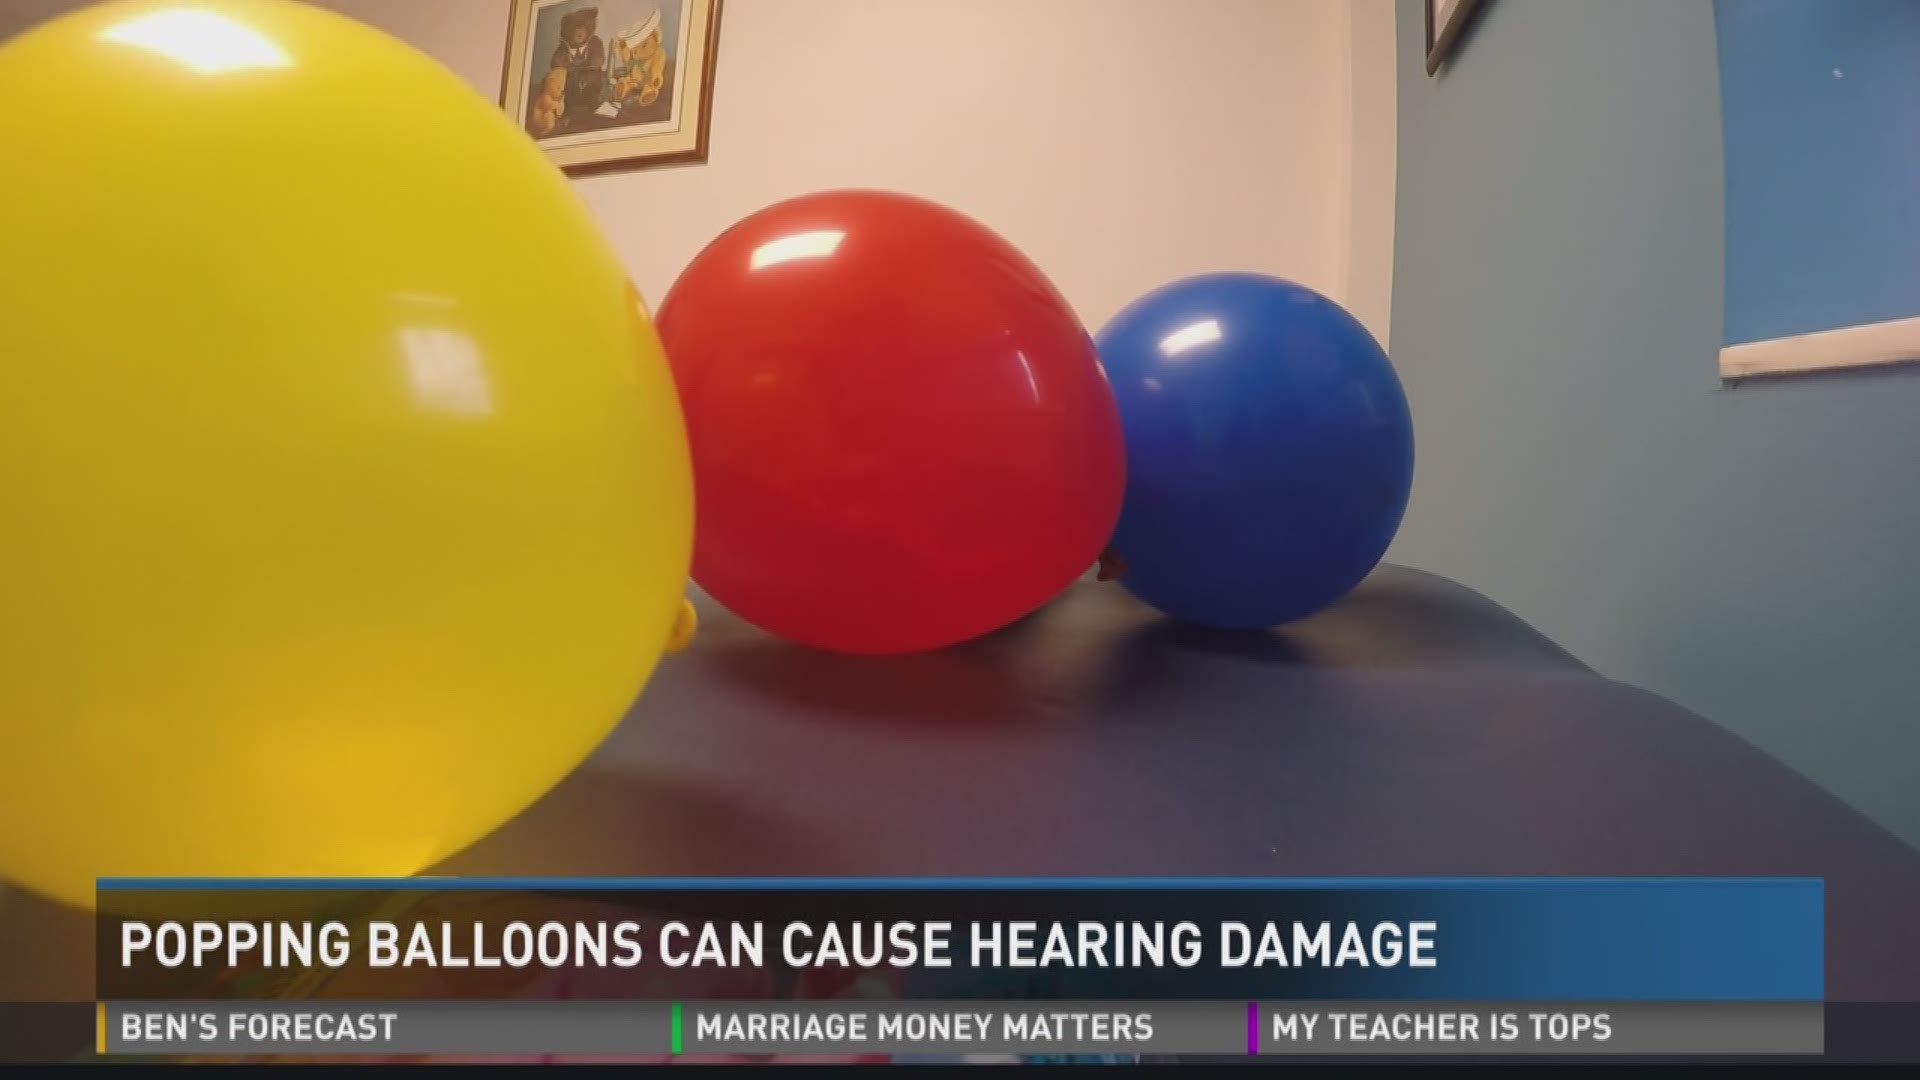 Popping balloons can cause hearing damage